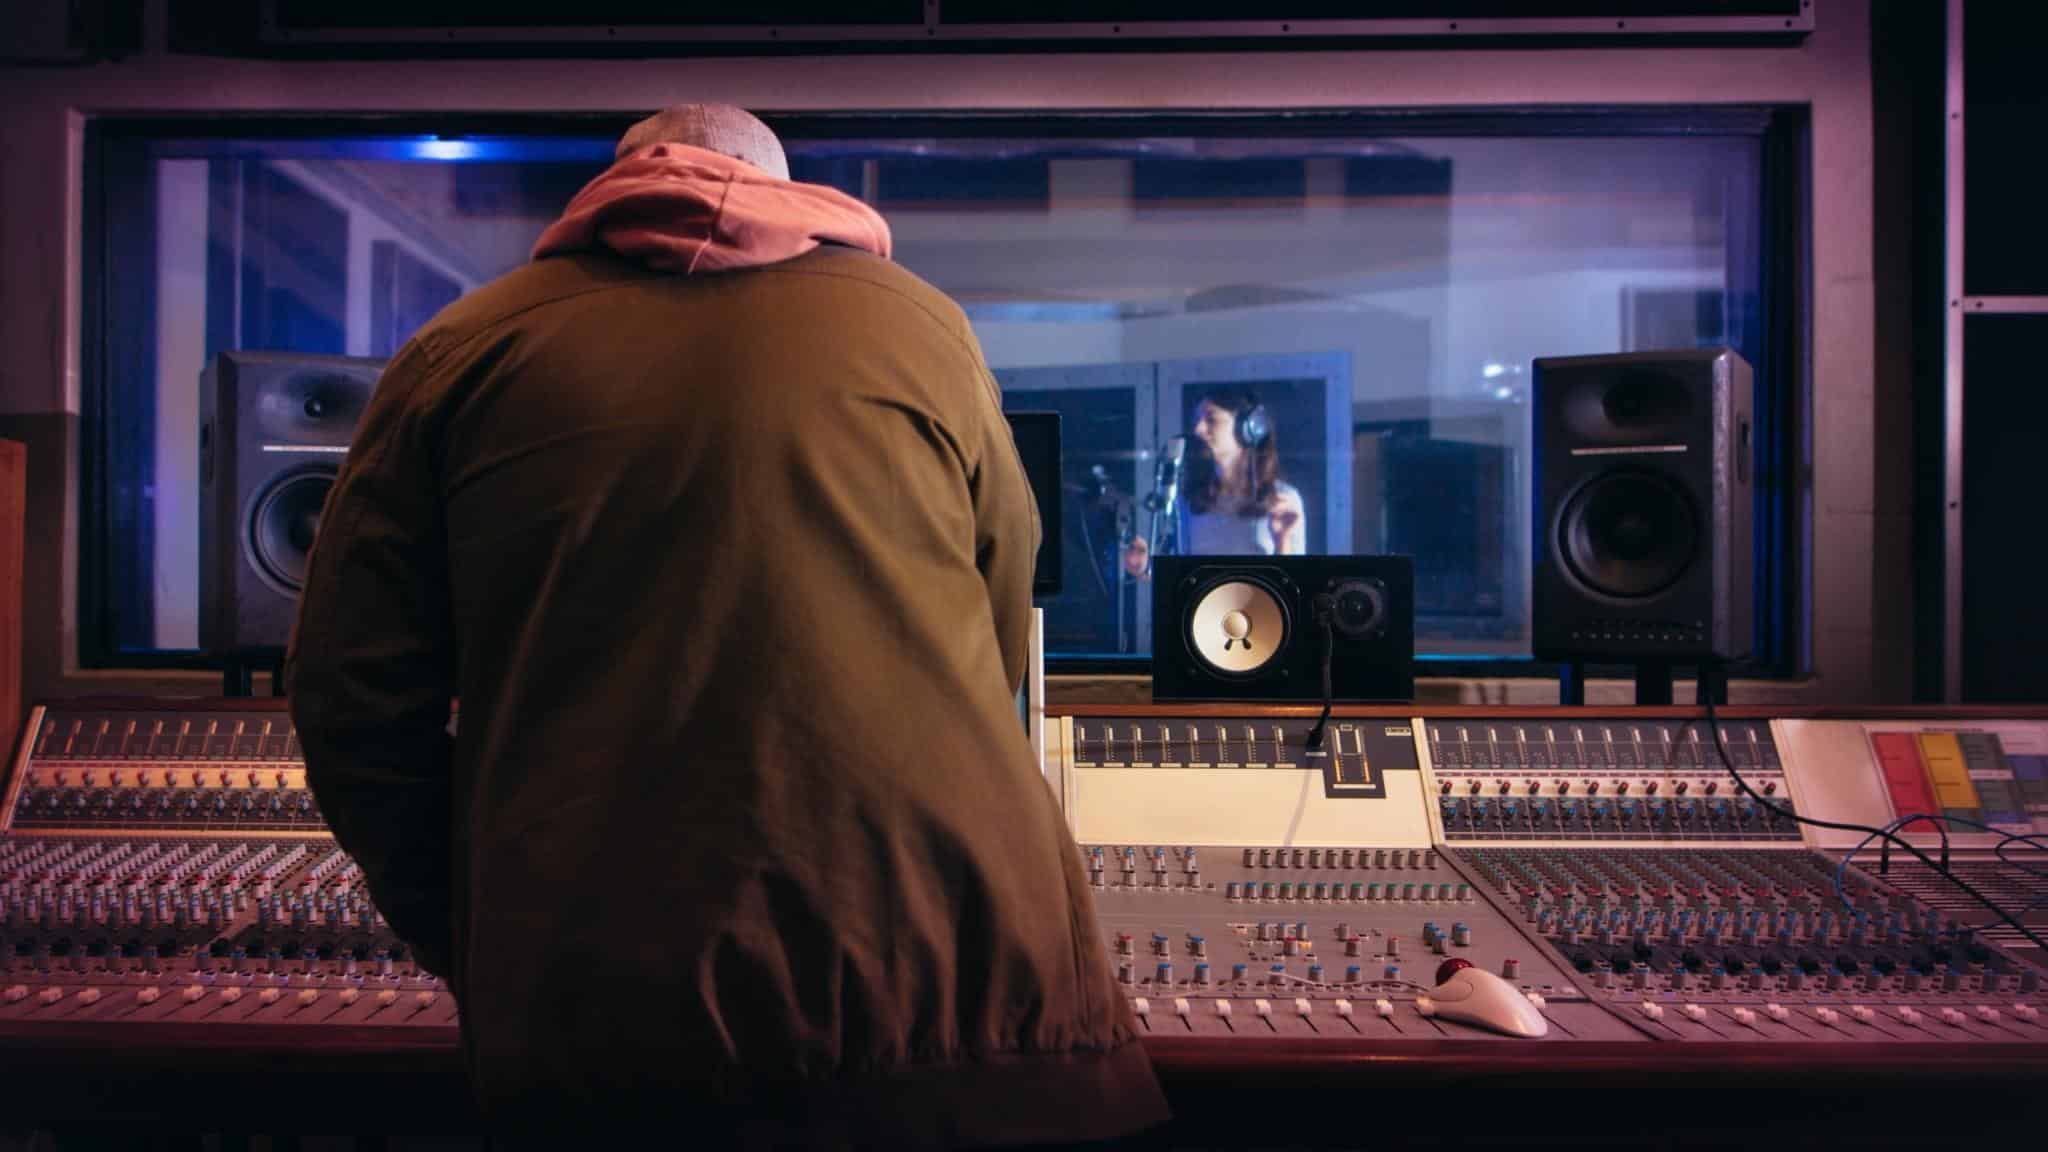 Producing music in a recording studio